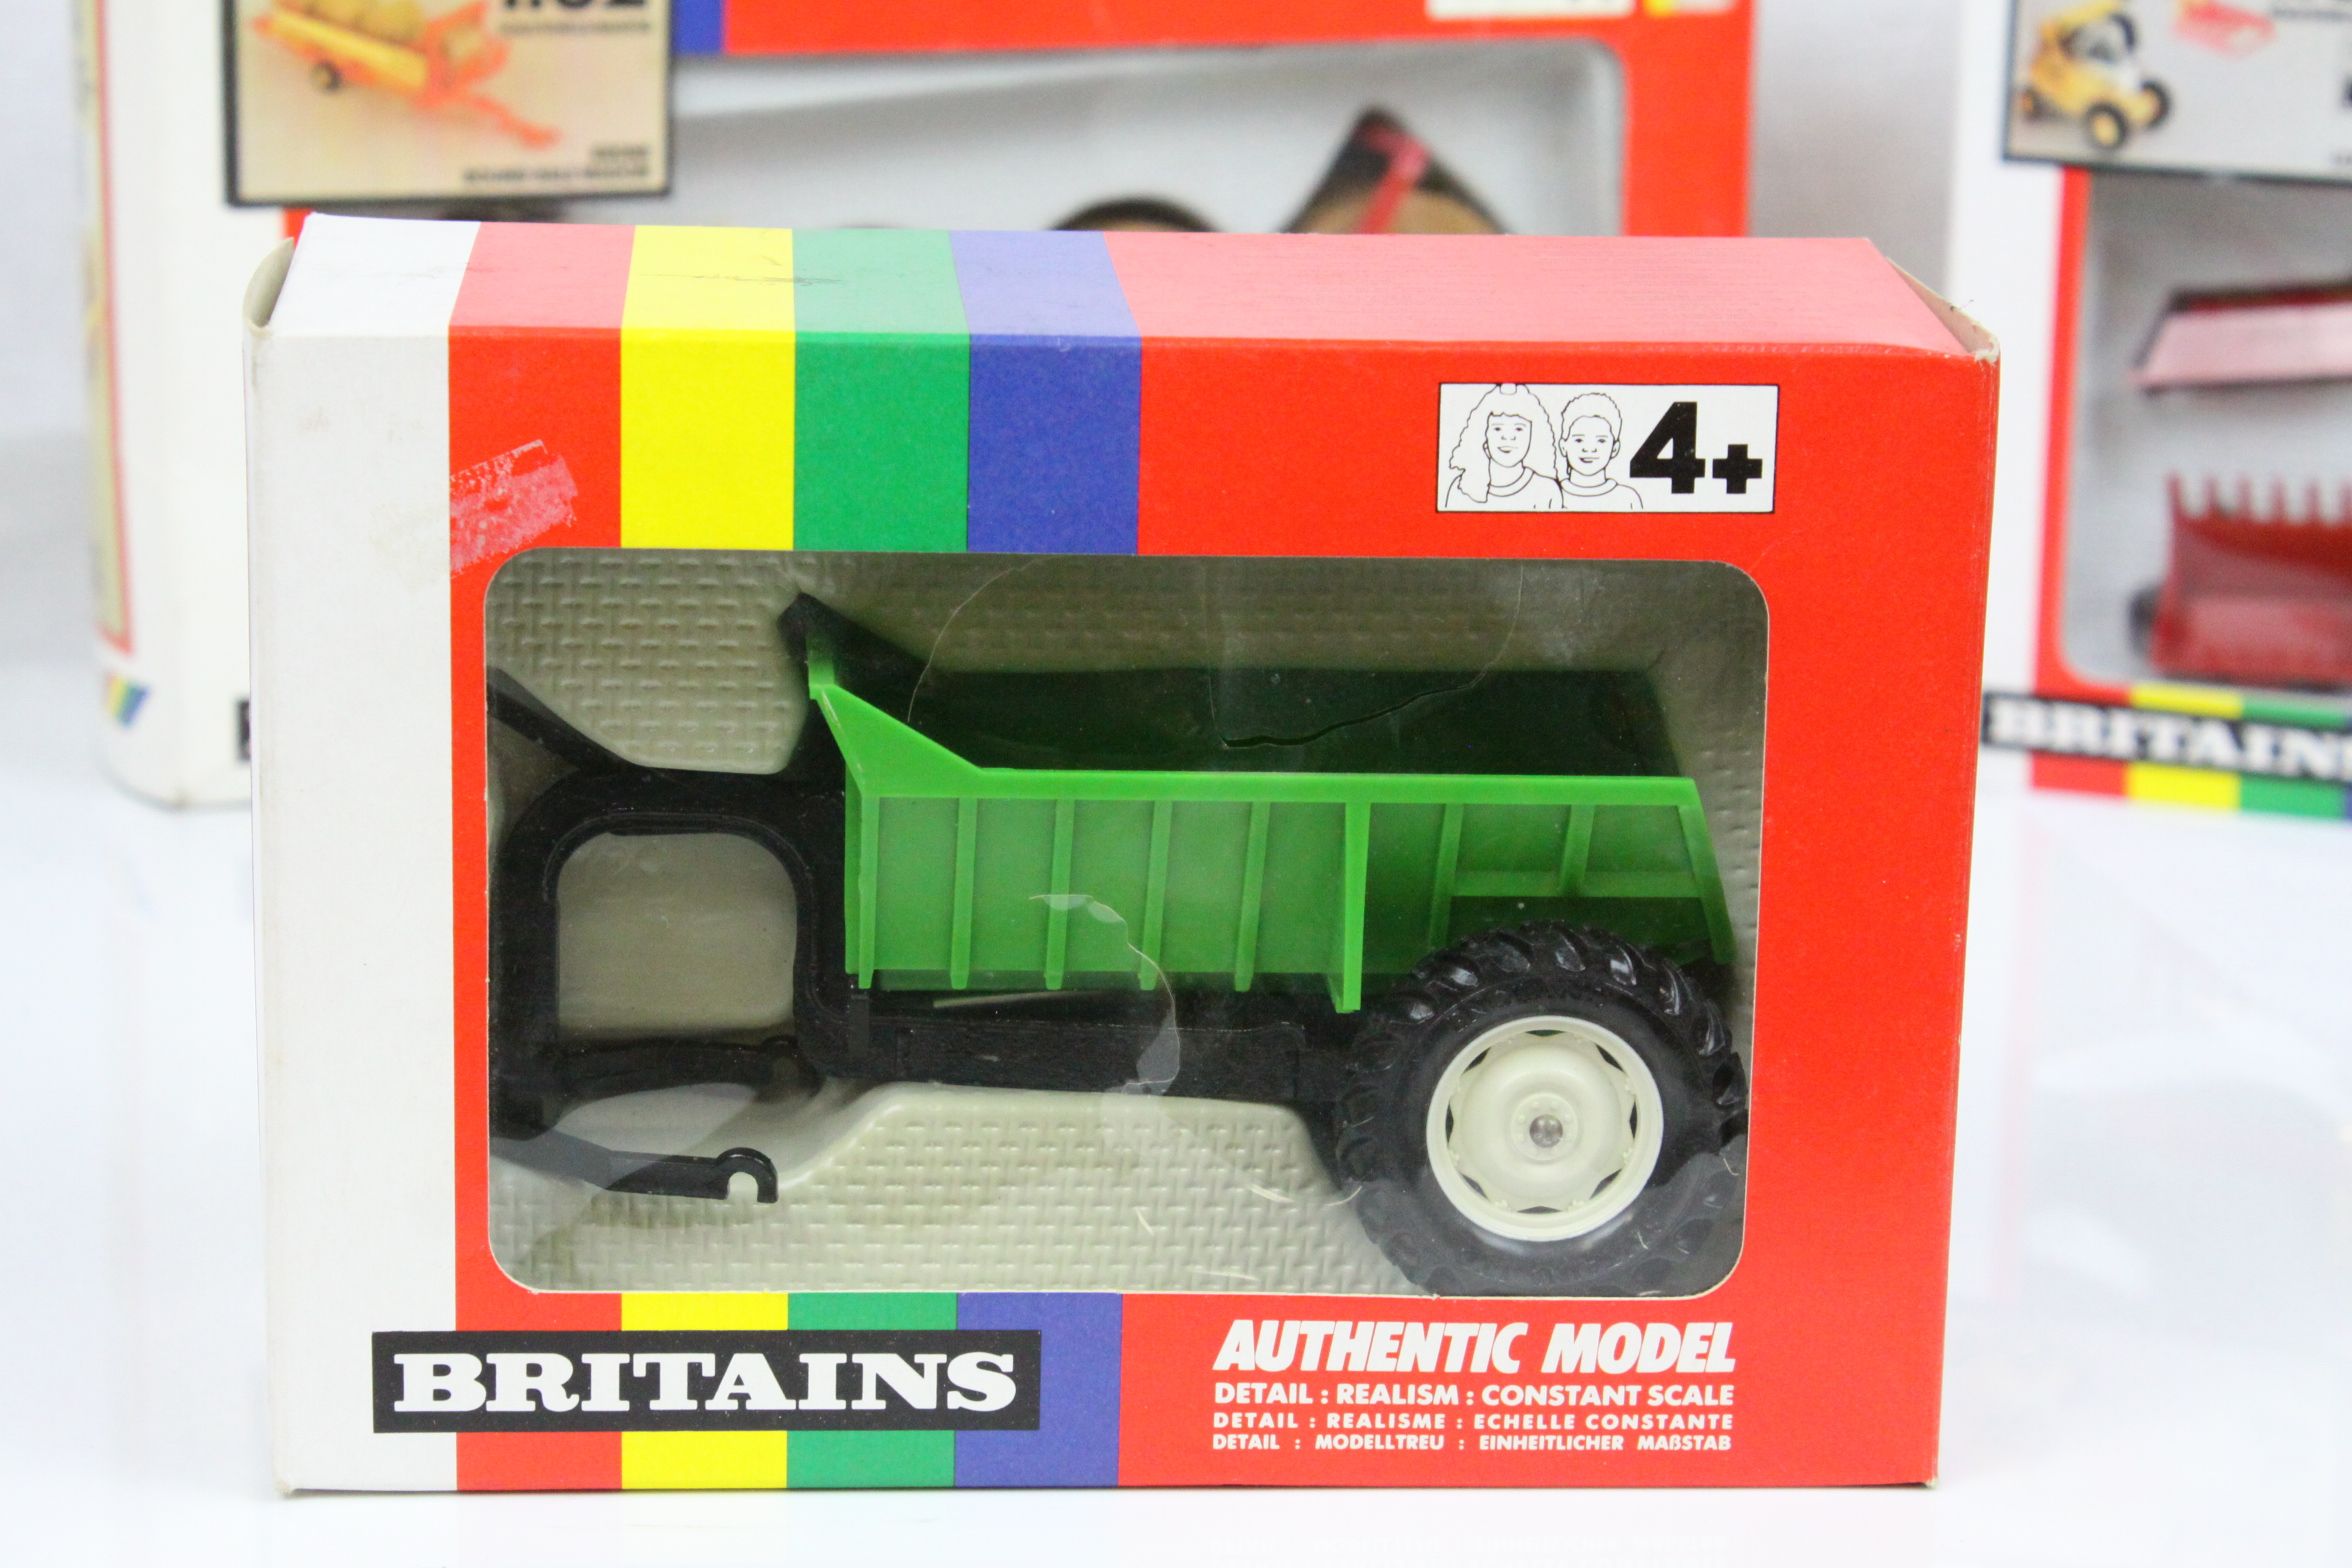 16 Boxed 1:32 Britains farming models to include 9566, 9559, 9539, 9548, 9547, 9574, 9509, 9519, - Image 23 of 27